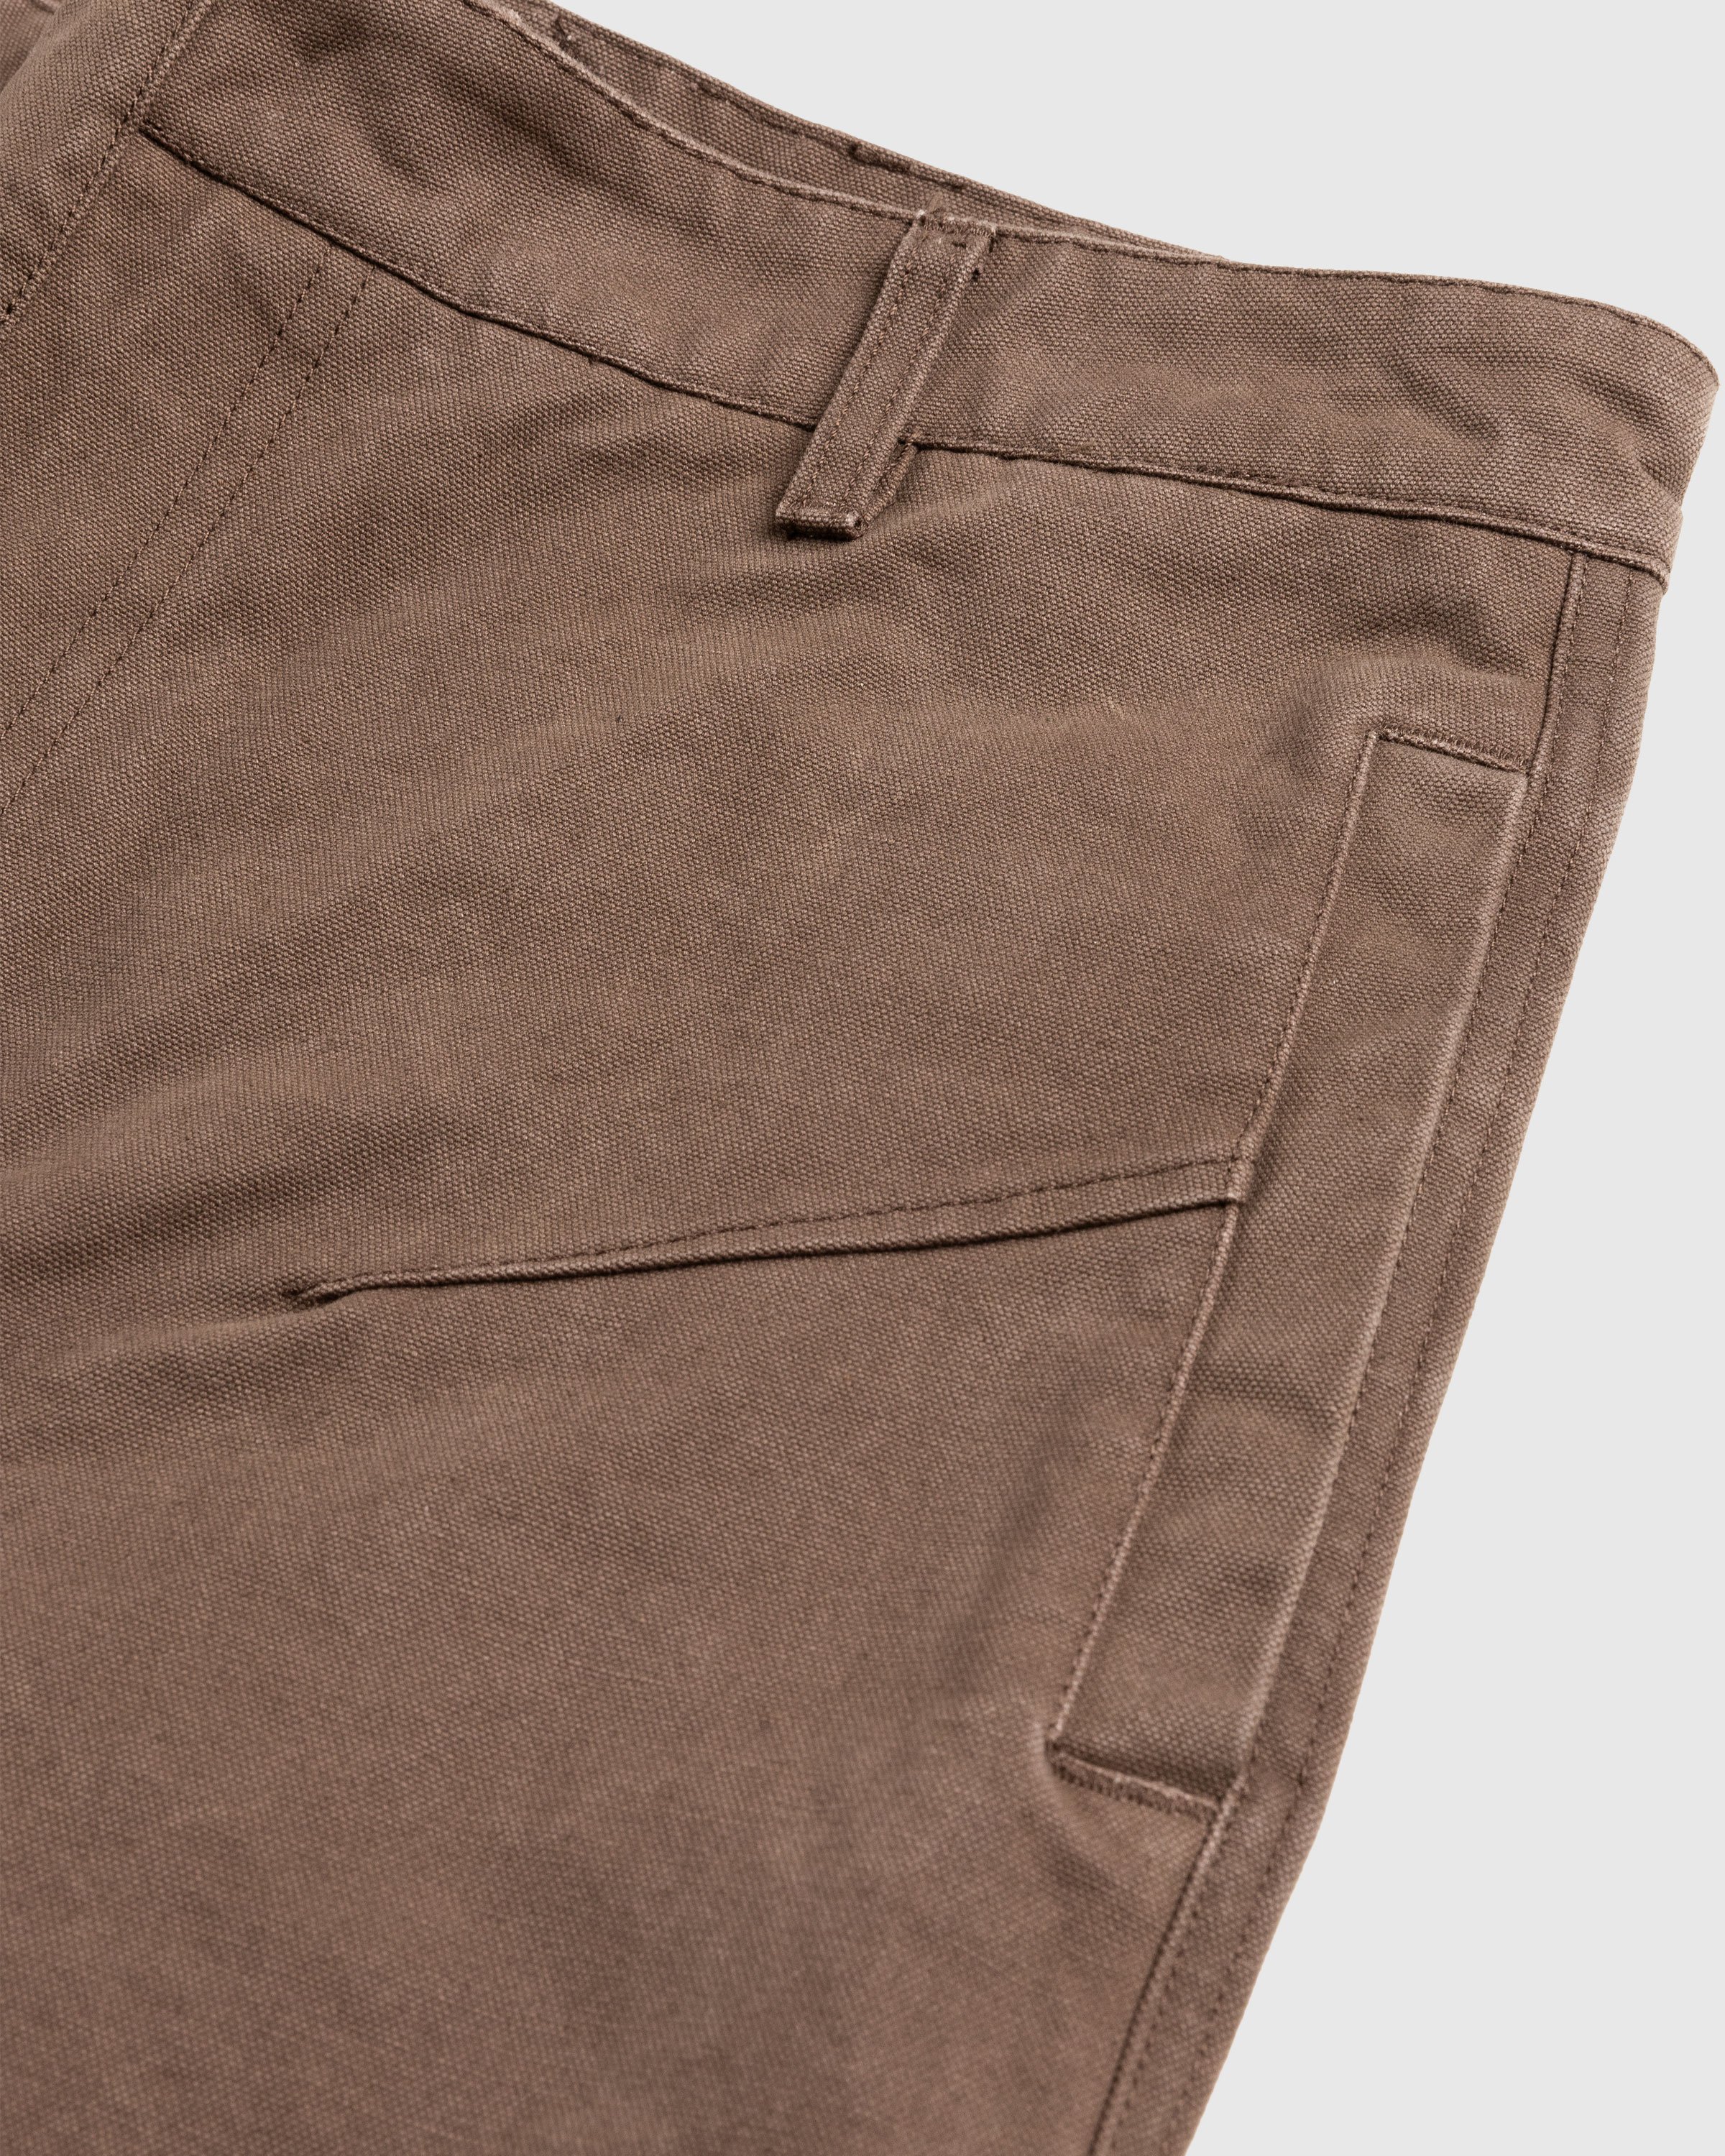 Entire Studios - Hard Cargo Carbon - Clothing - Brown - Image 5